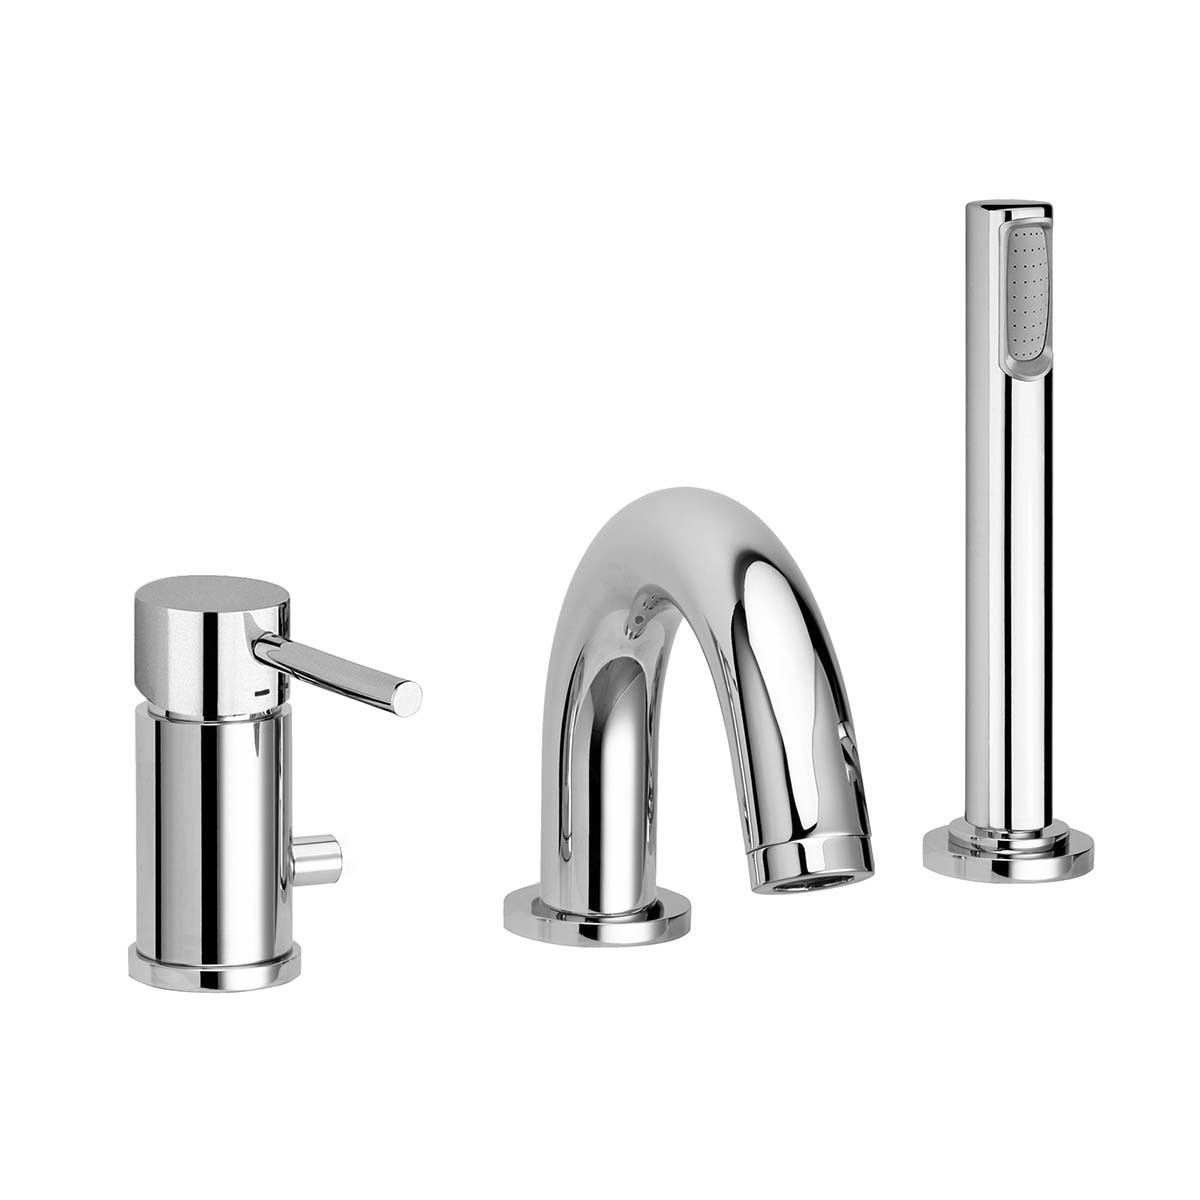 WS Bath Collections Light LIG 040 Three Hole Bath Faucet With Hand